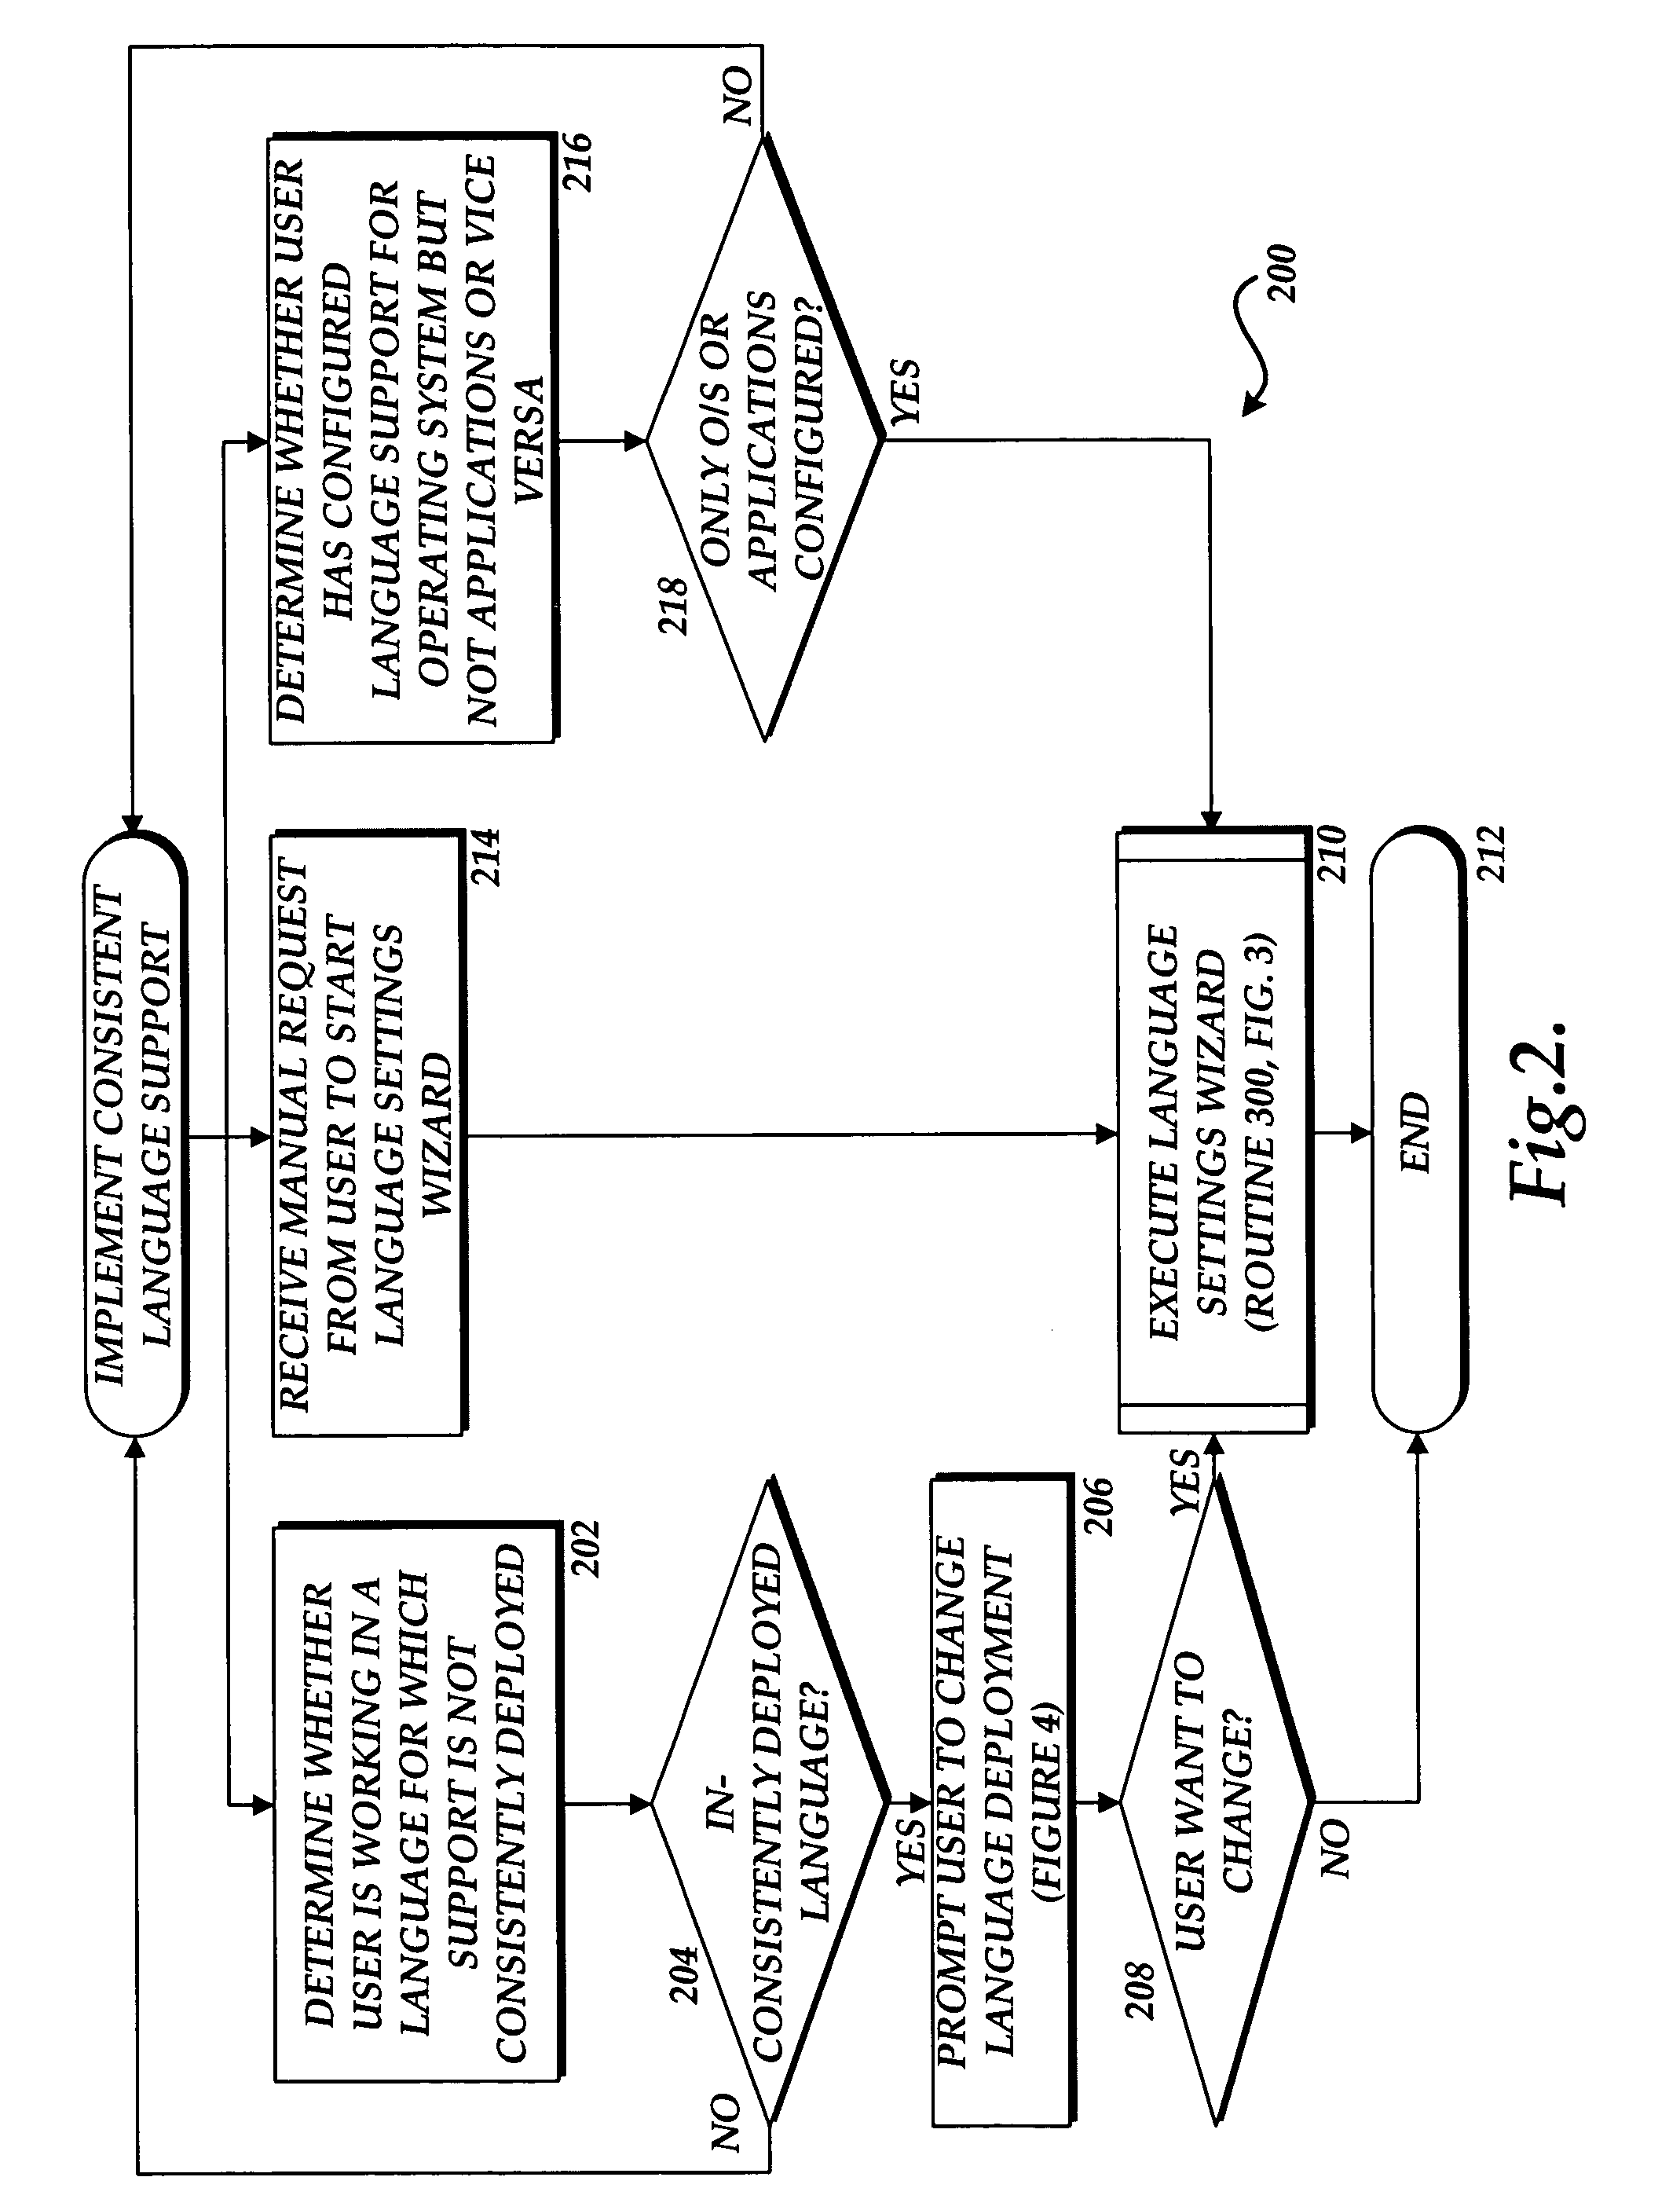 Method and computer-readable medium for consistent configuration of language support across operating system and application programs